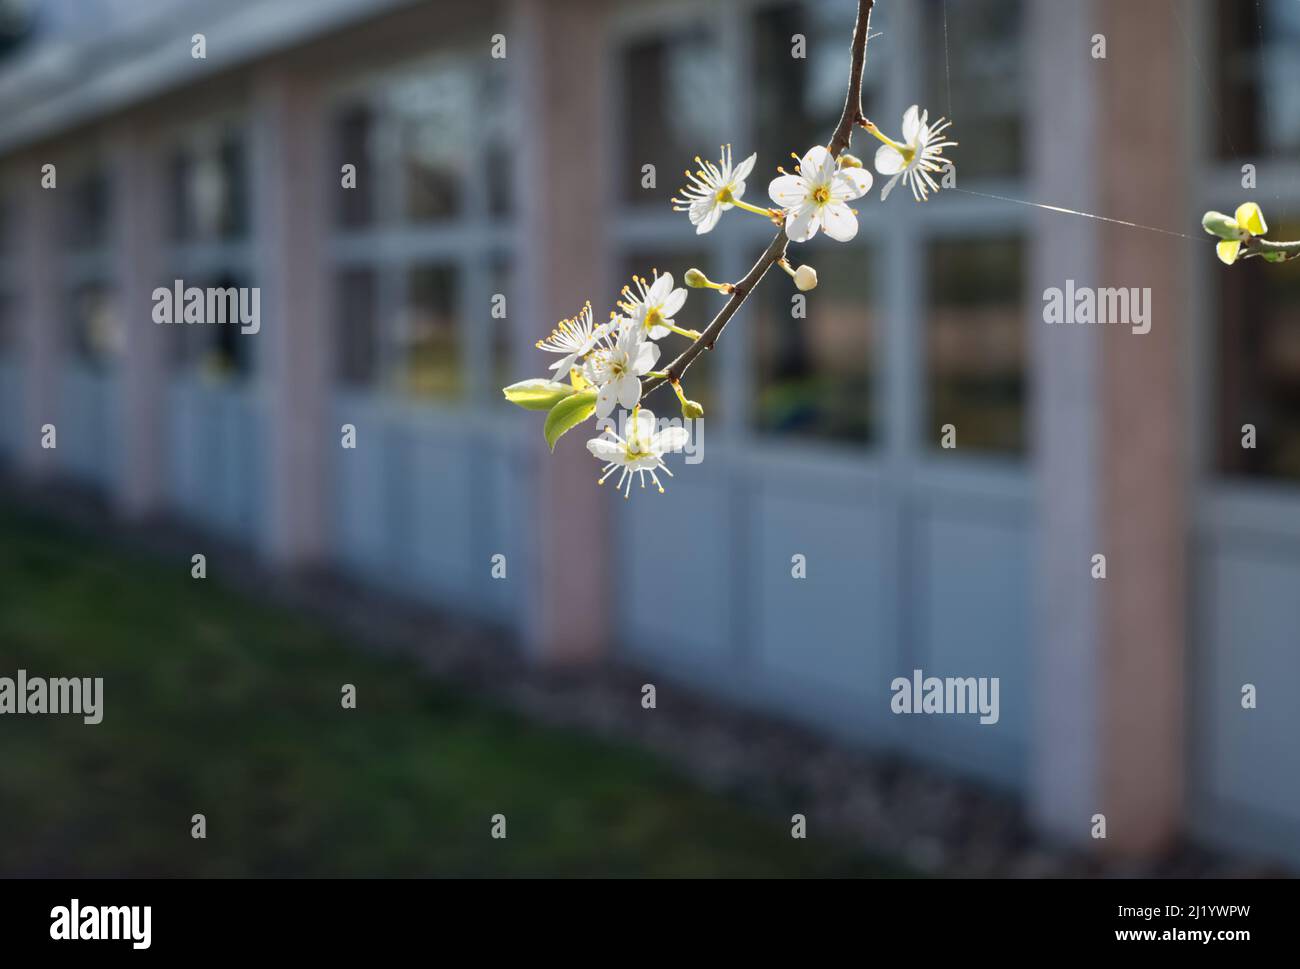 closeup view of a single branch in white bloom and a single silk of a spider in the foreground, blurred parts of a building in the background Stock Photo